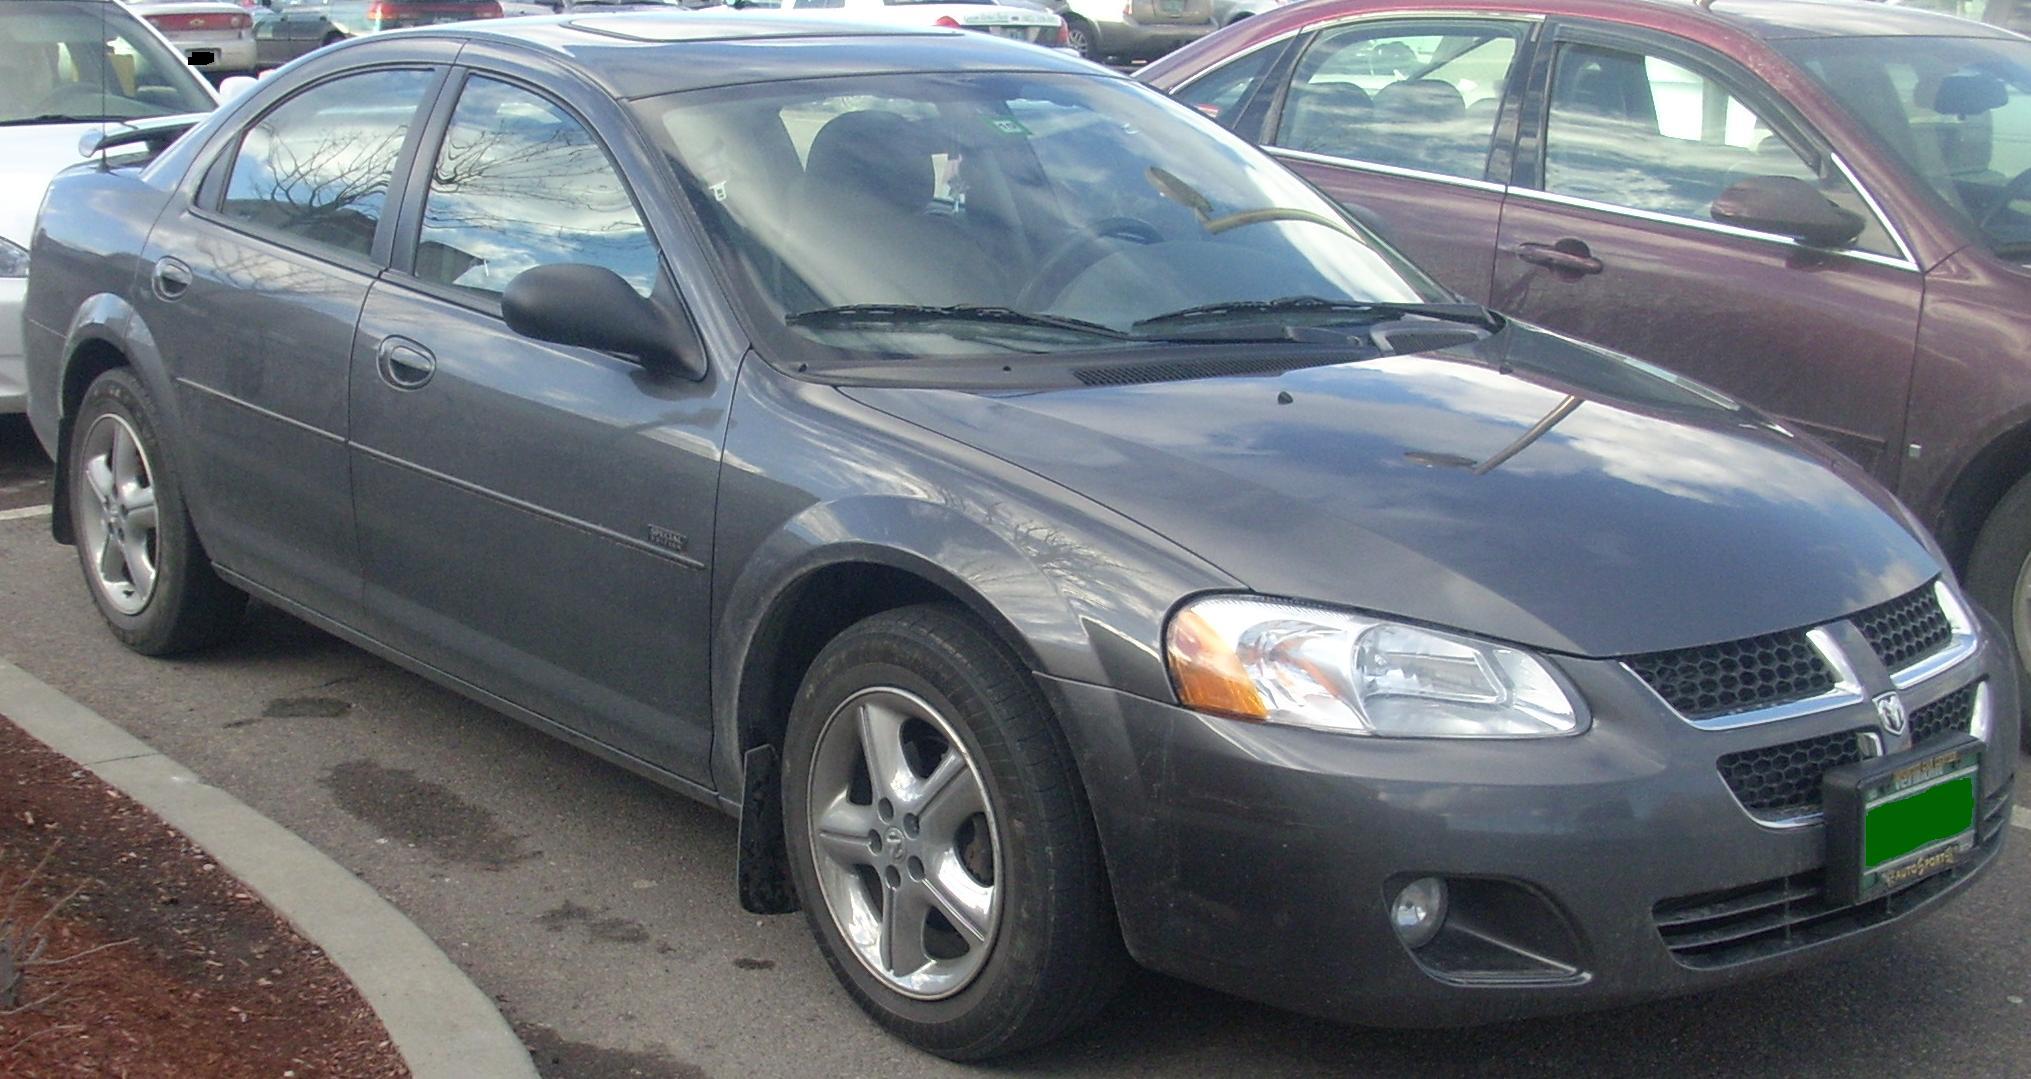 File:'04-'06 Dodge Stratus Special Edition.jpg - Wikimedia Commons